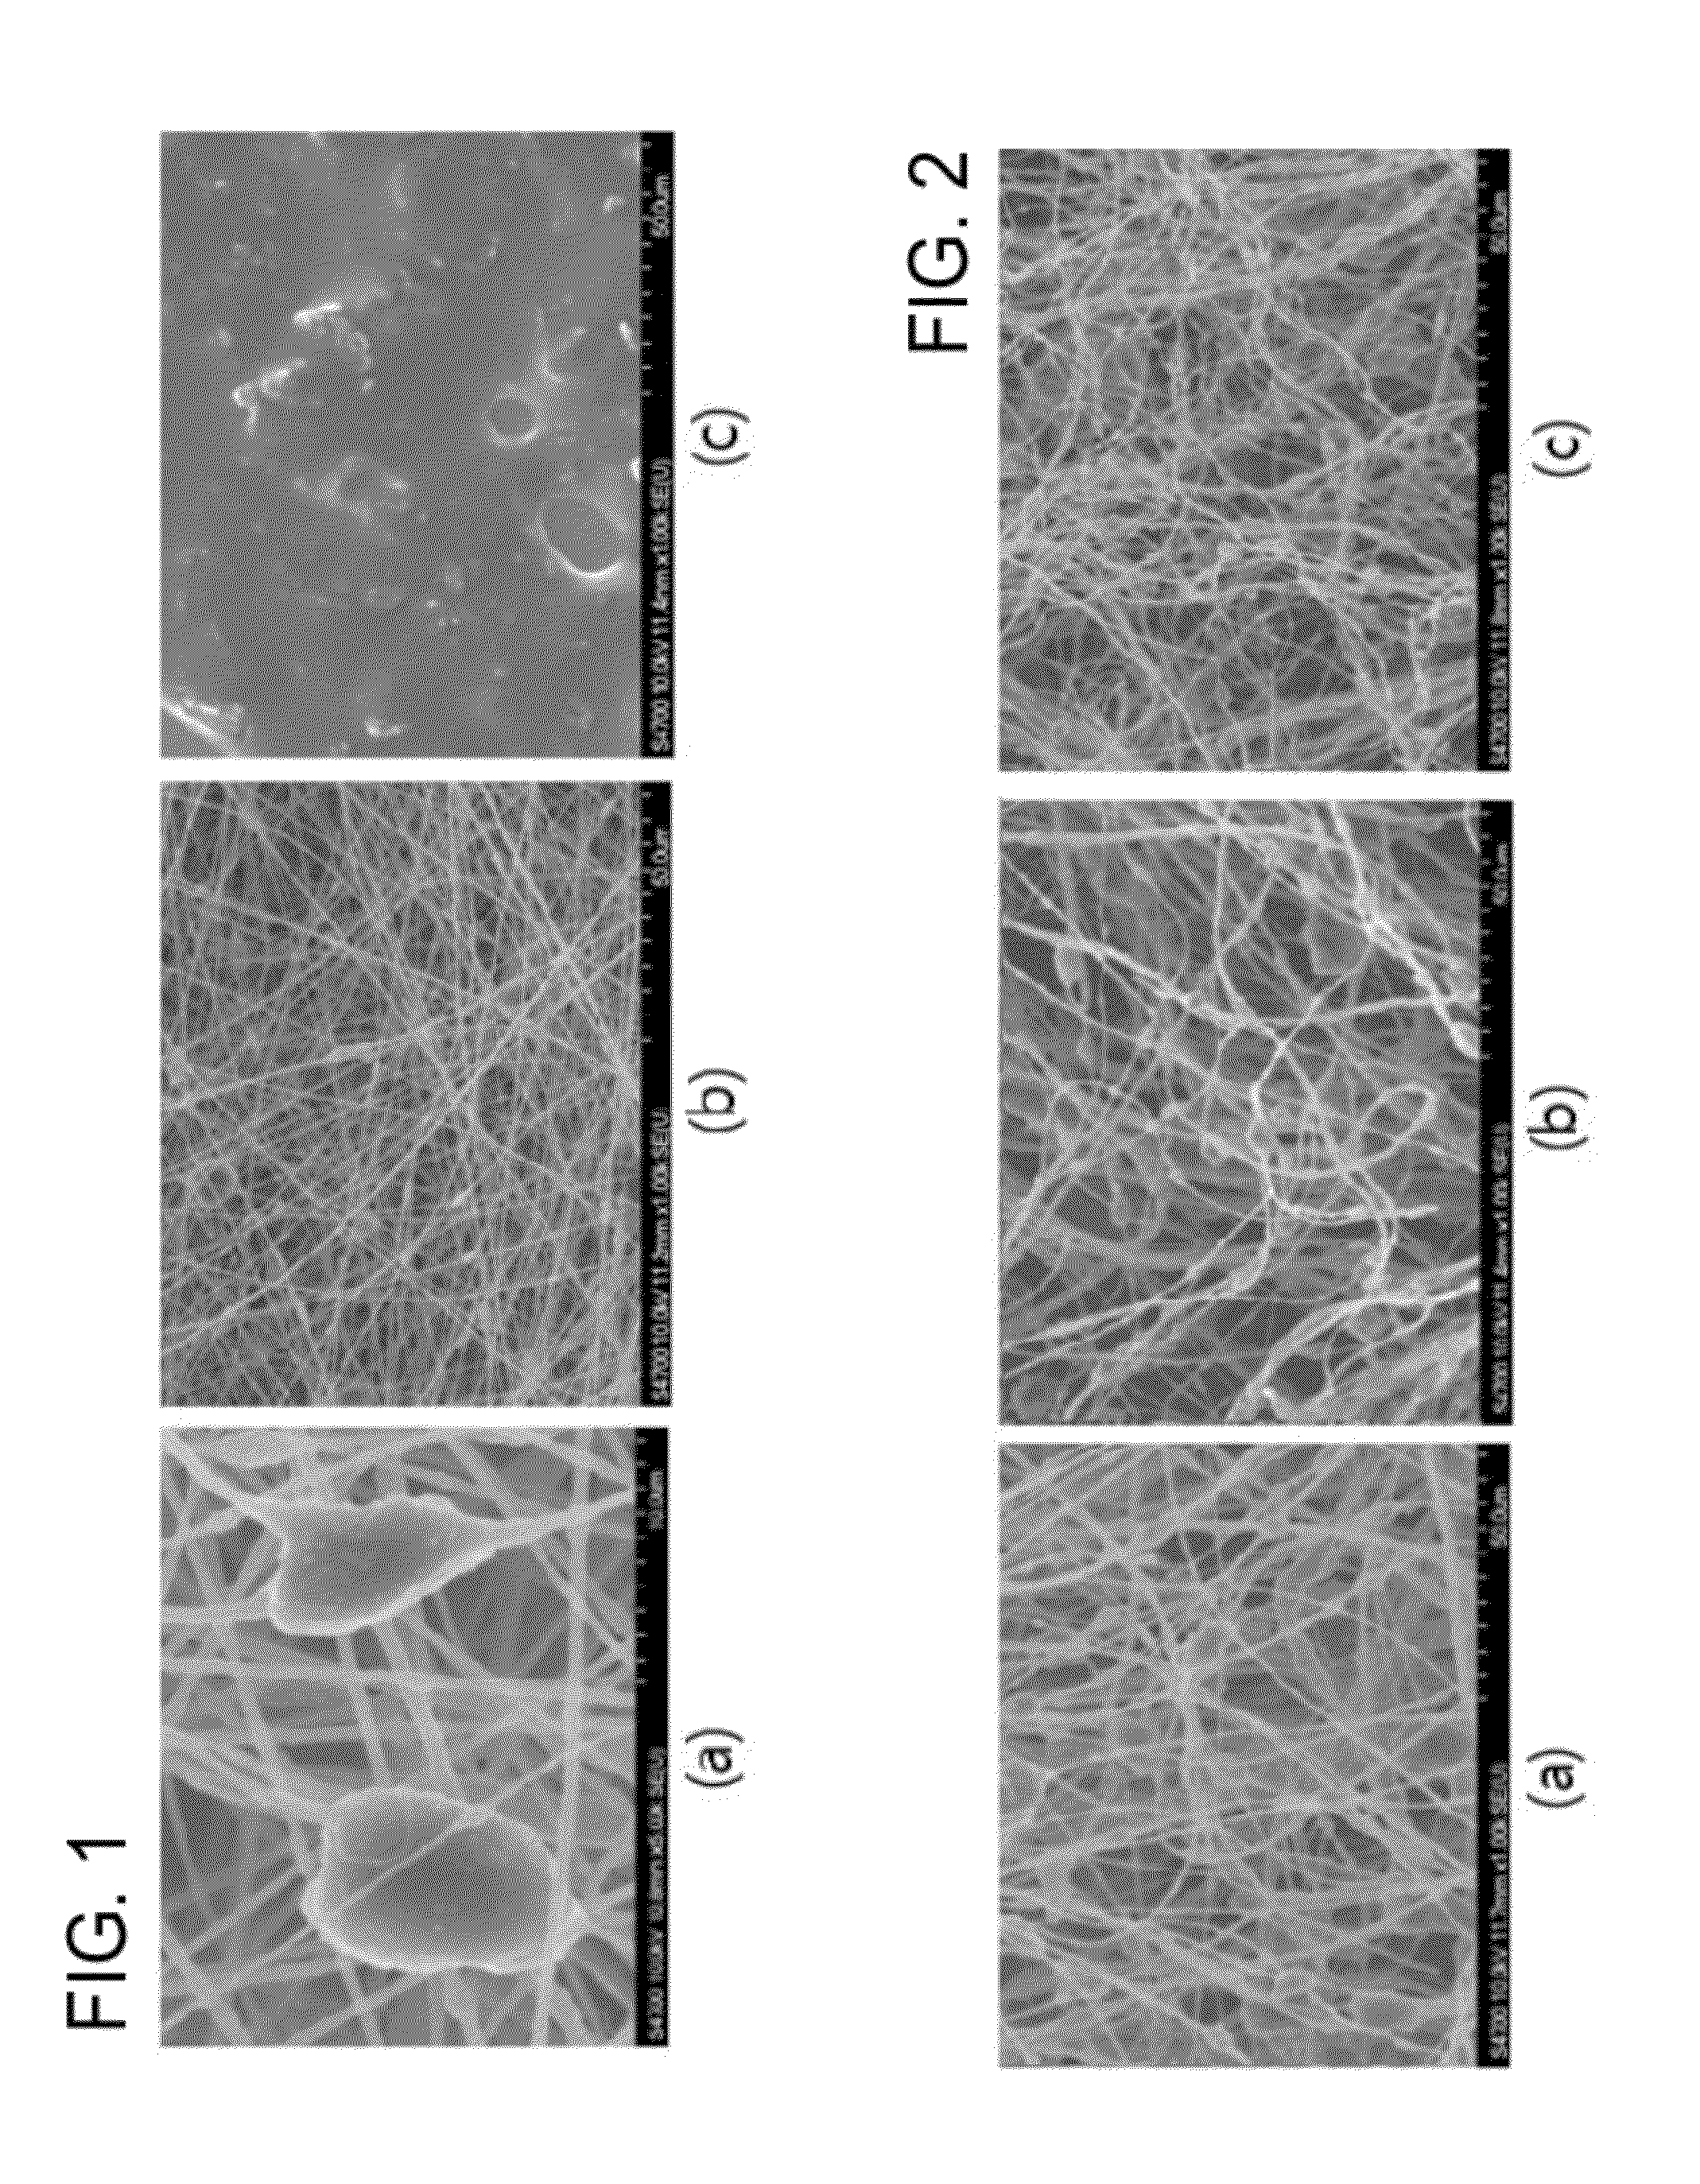 Sheets including fibrous aerogel and method for producing the same